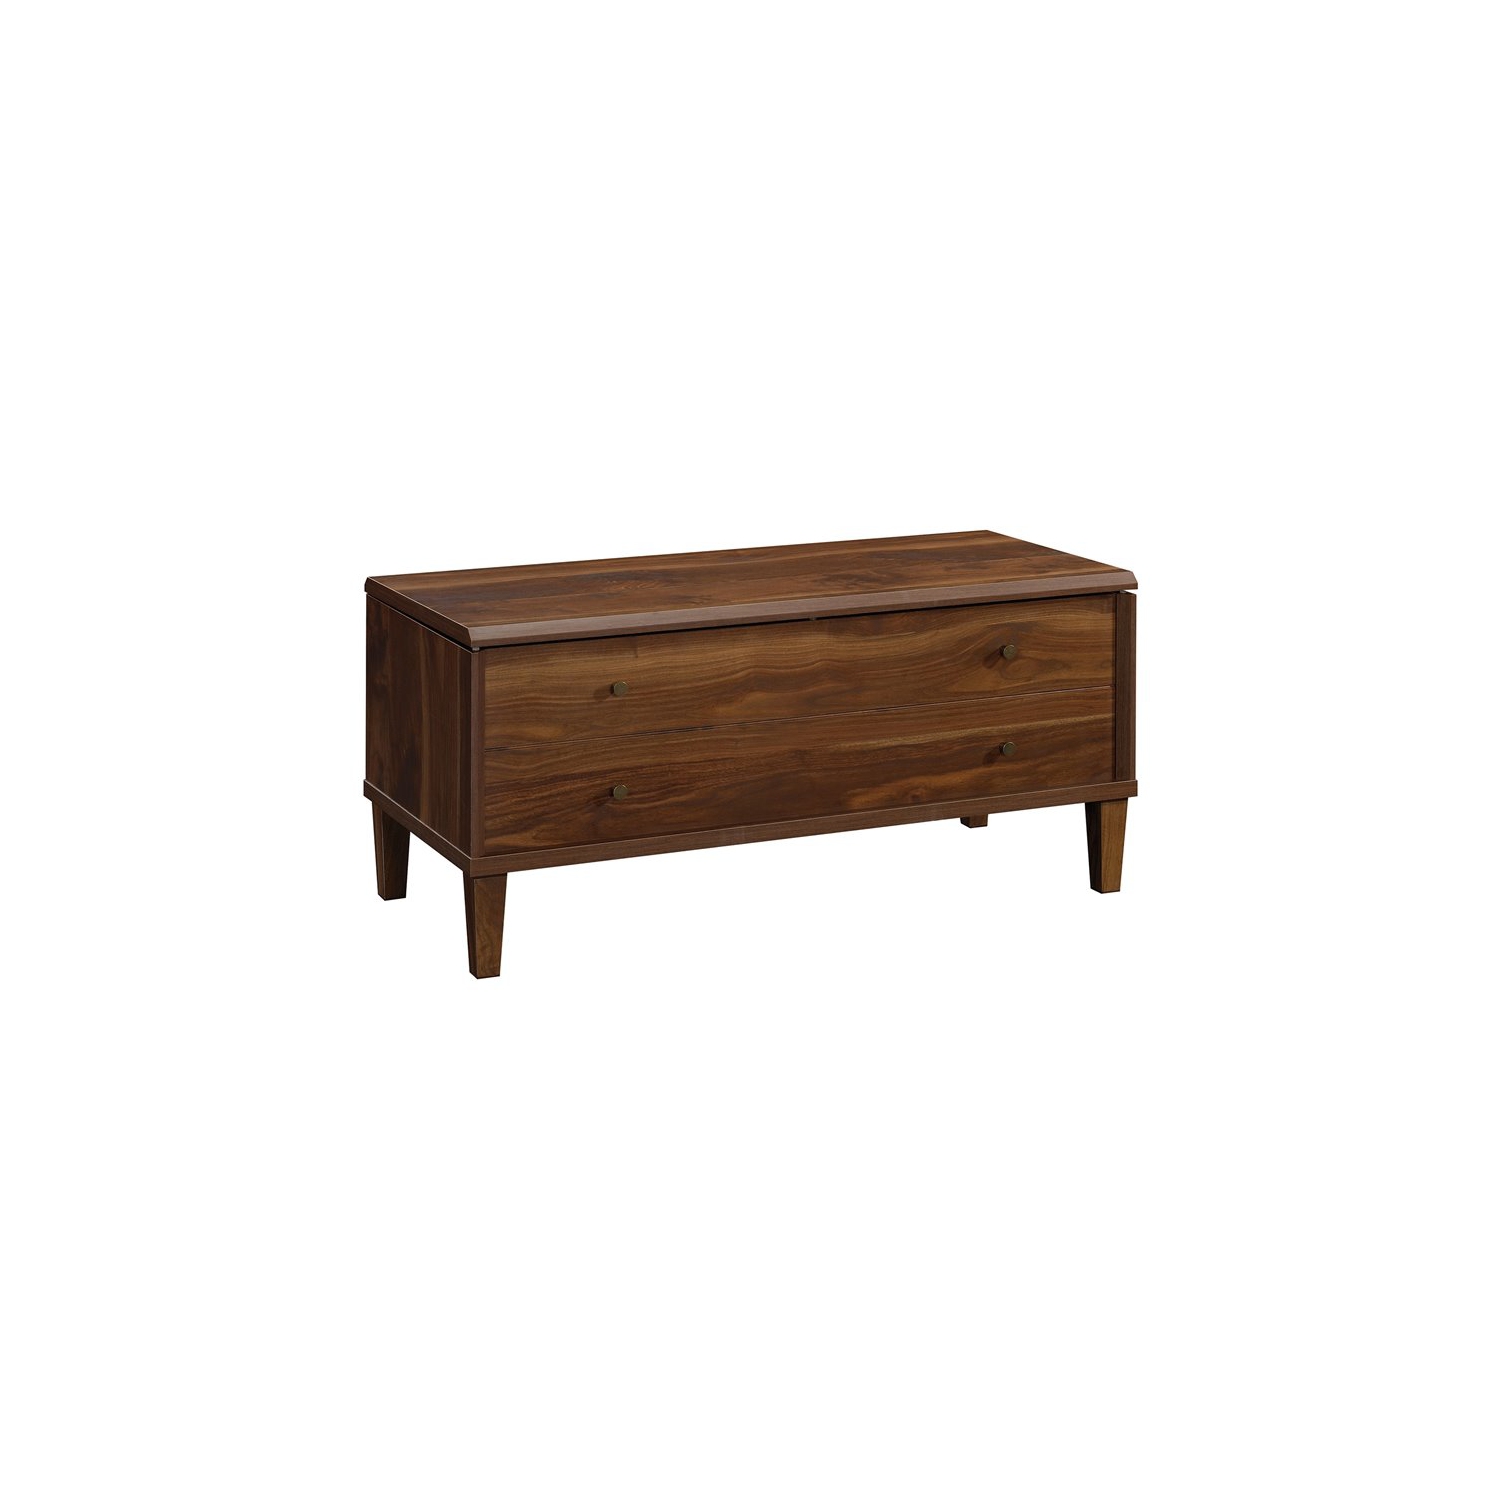 Sauder Willow Place Engineered Wood Lift-Top Coffee Table in Grand Walnut